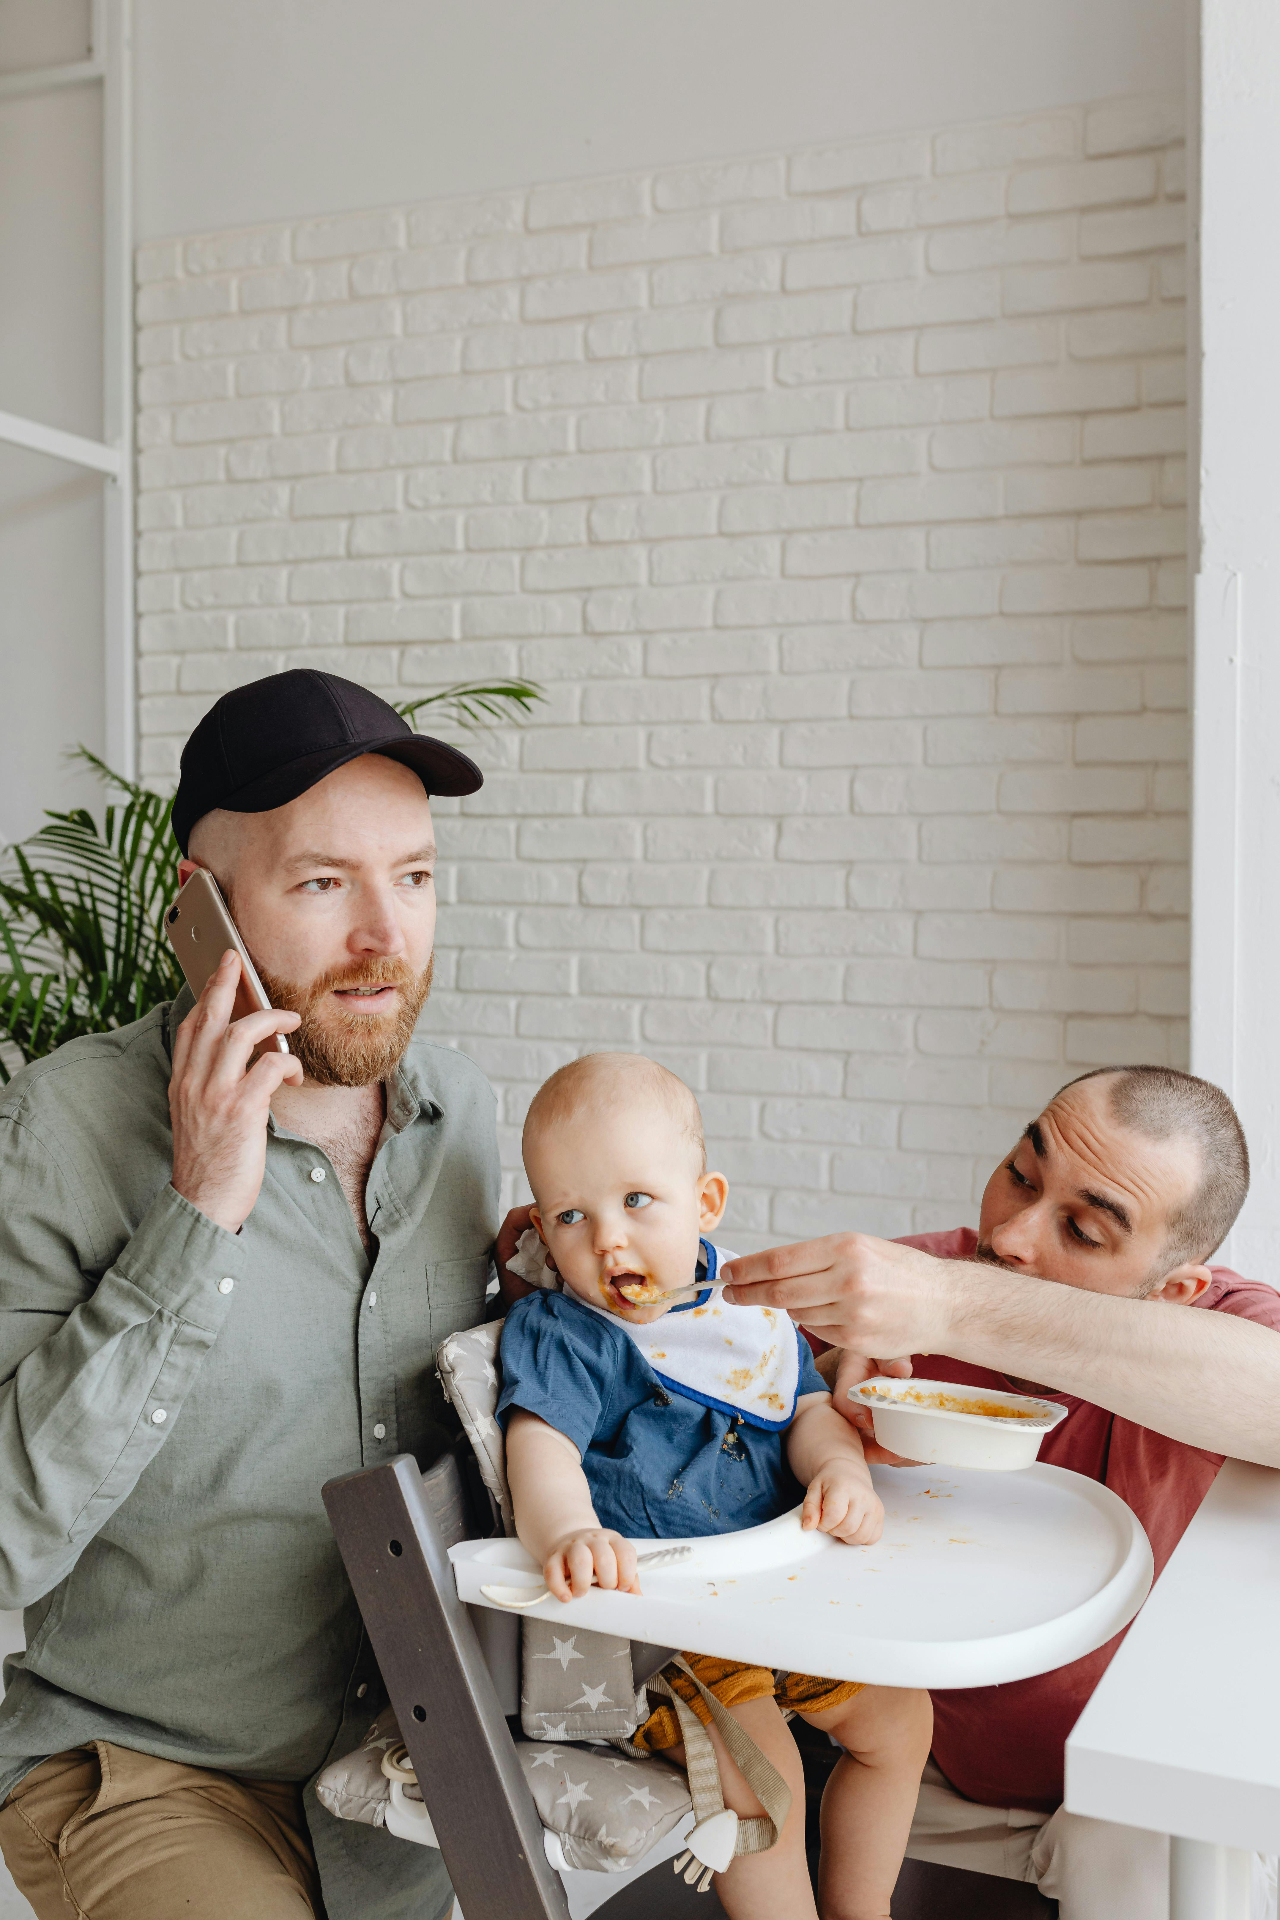 gay couple feeding a baby intimacy moms relationship marriage connection love support communication Katheryn Barton Uplift and Connect Counseling